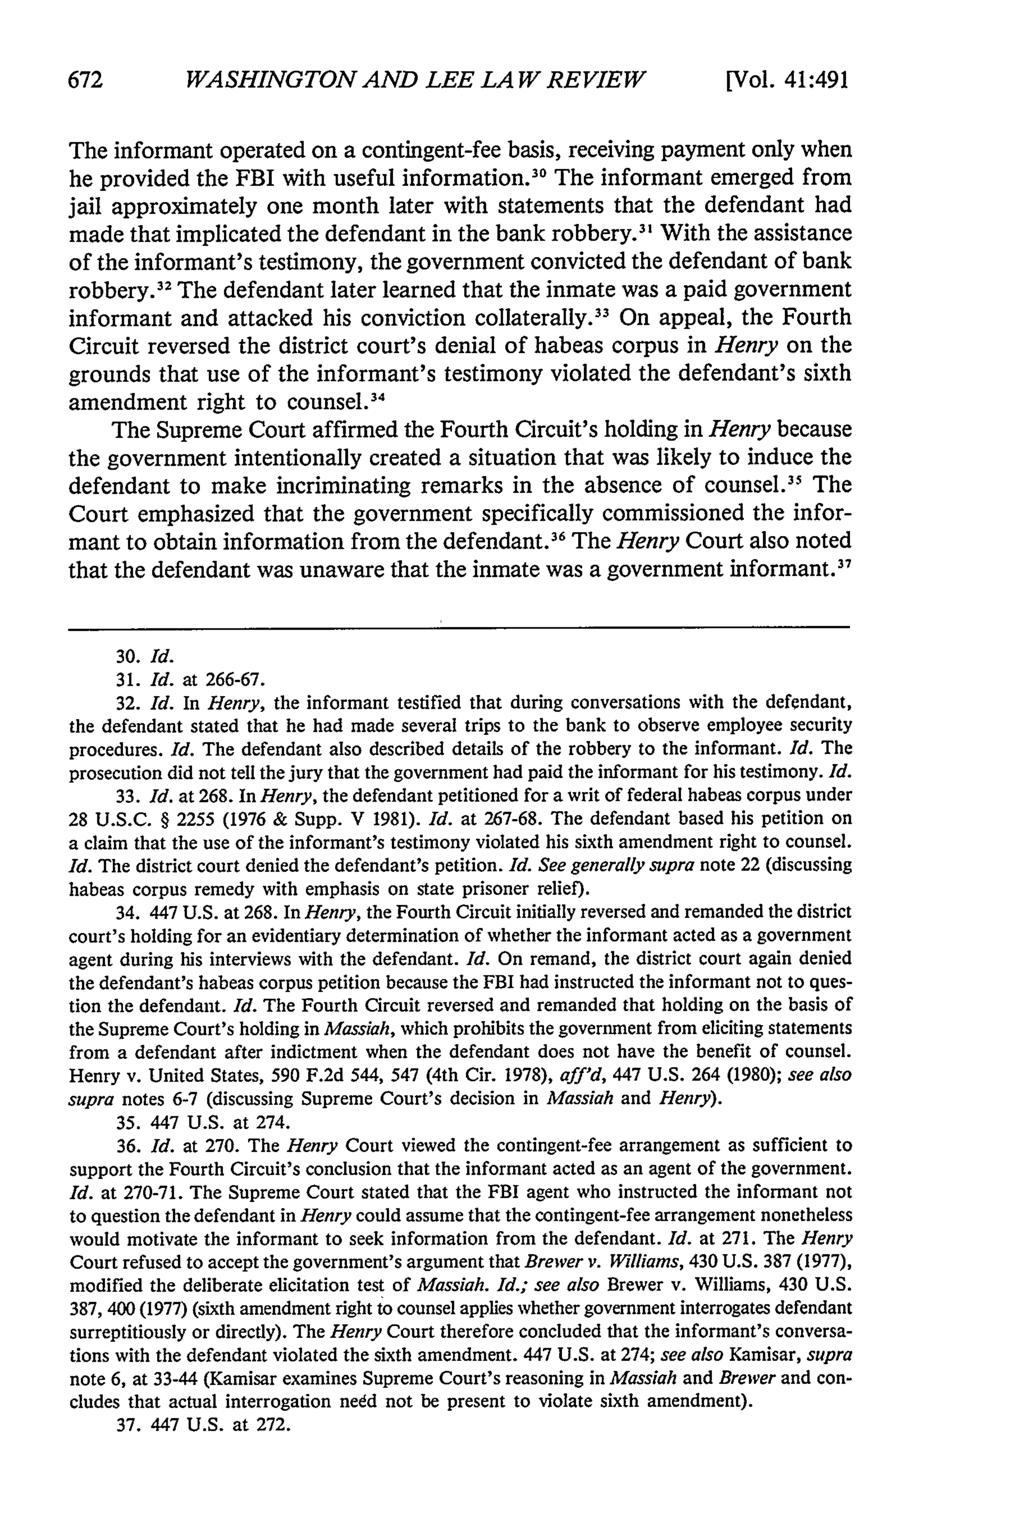 WASHINGTON AND LEE LAW REVIEW [Vol. 41:491 The informant operated on a contingent-fee basis, receiving payment only when he provided the FBI with useful information.